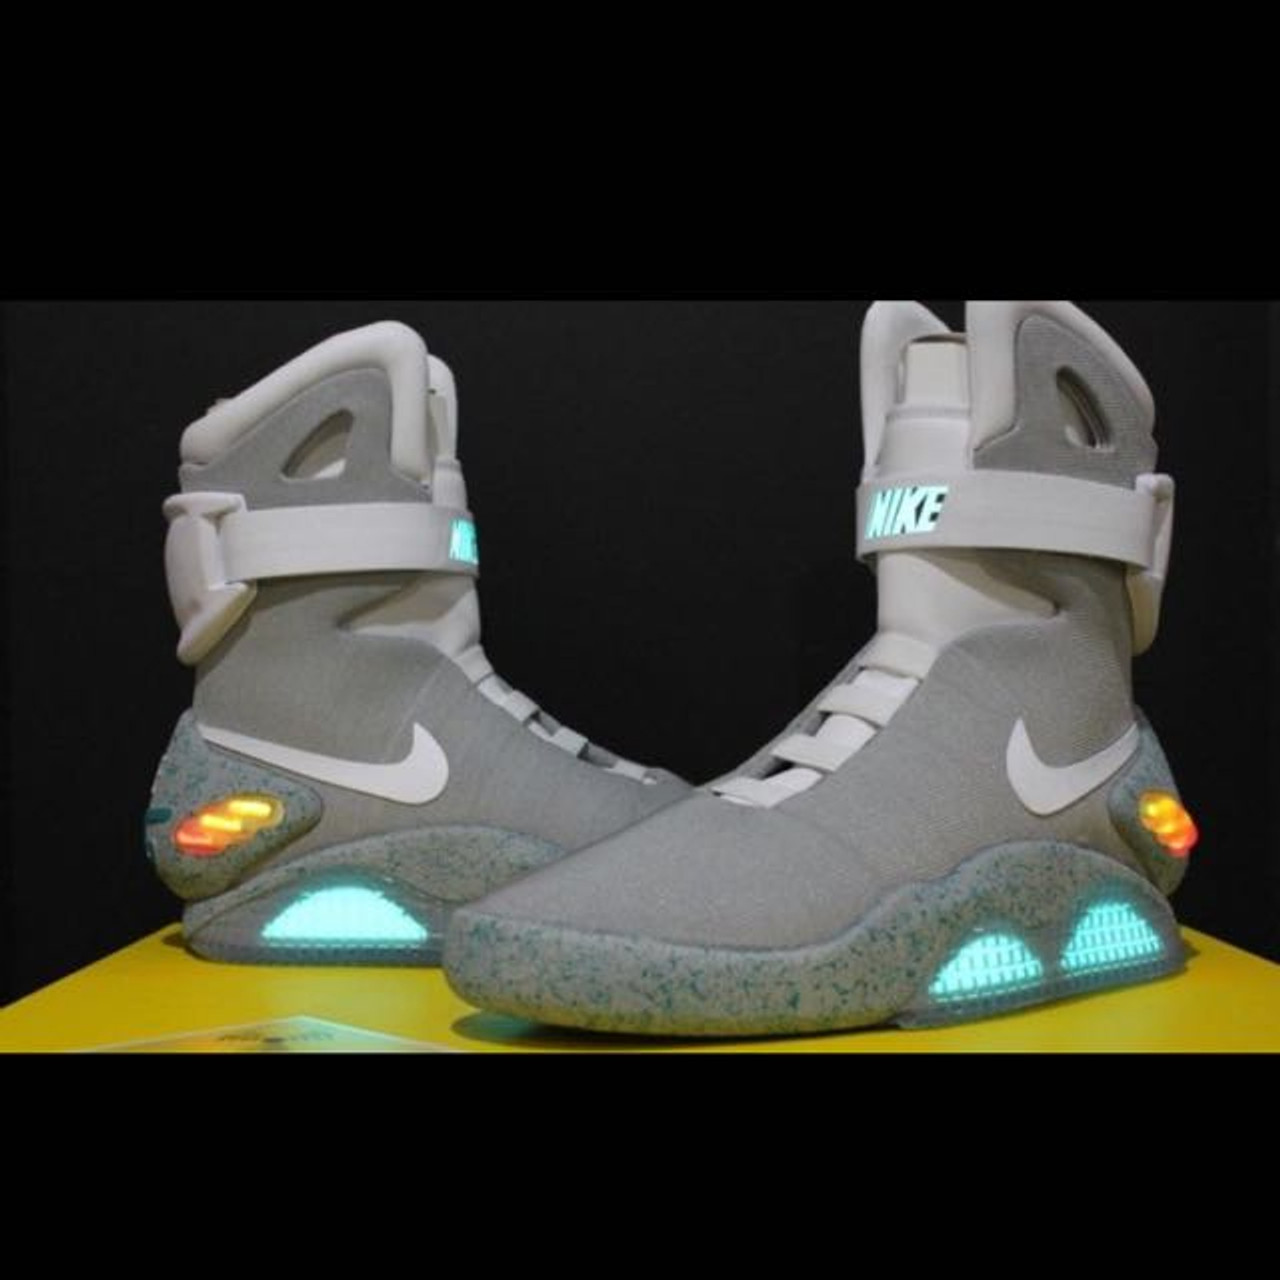 overhemd Prime Verrijking where to buy the best stockX High quality replica UA Nike air mag back to  the future sneakers (HIGHEST QUALITY) Hypedripz is the best high quality  trusted clone replica fake designer hypebeast